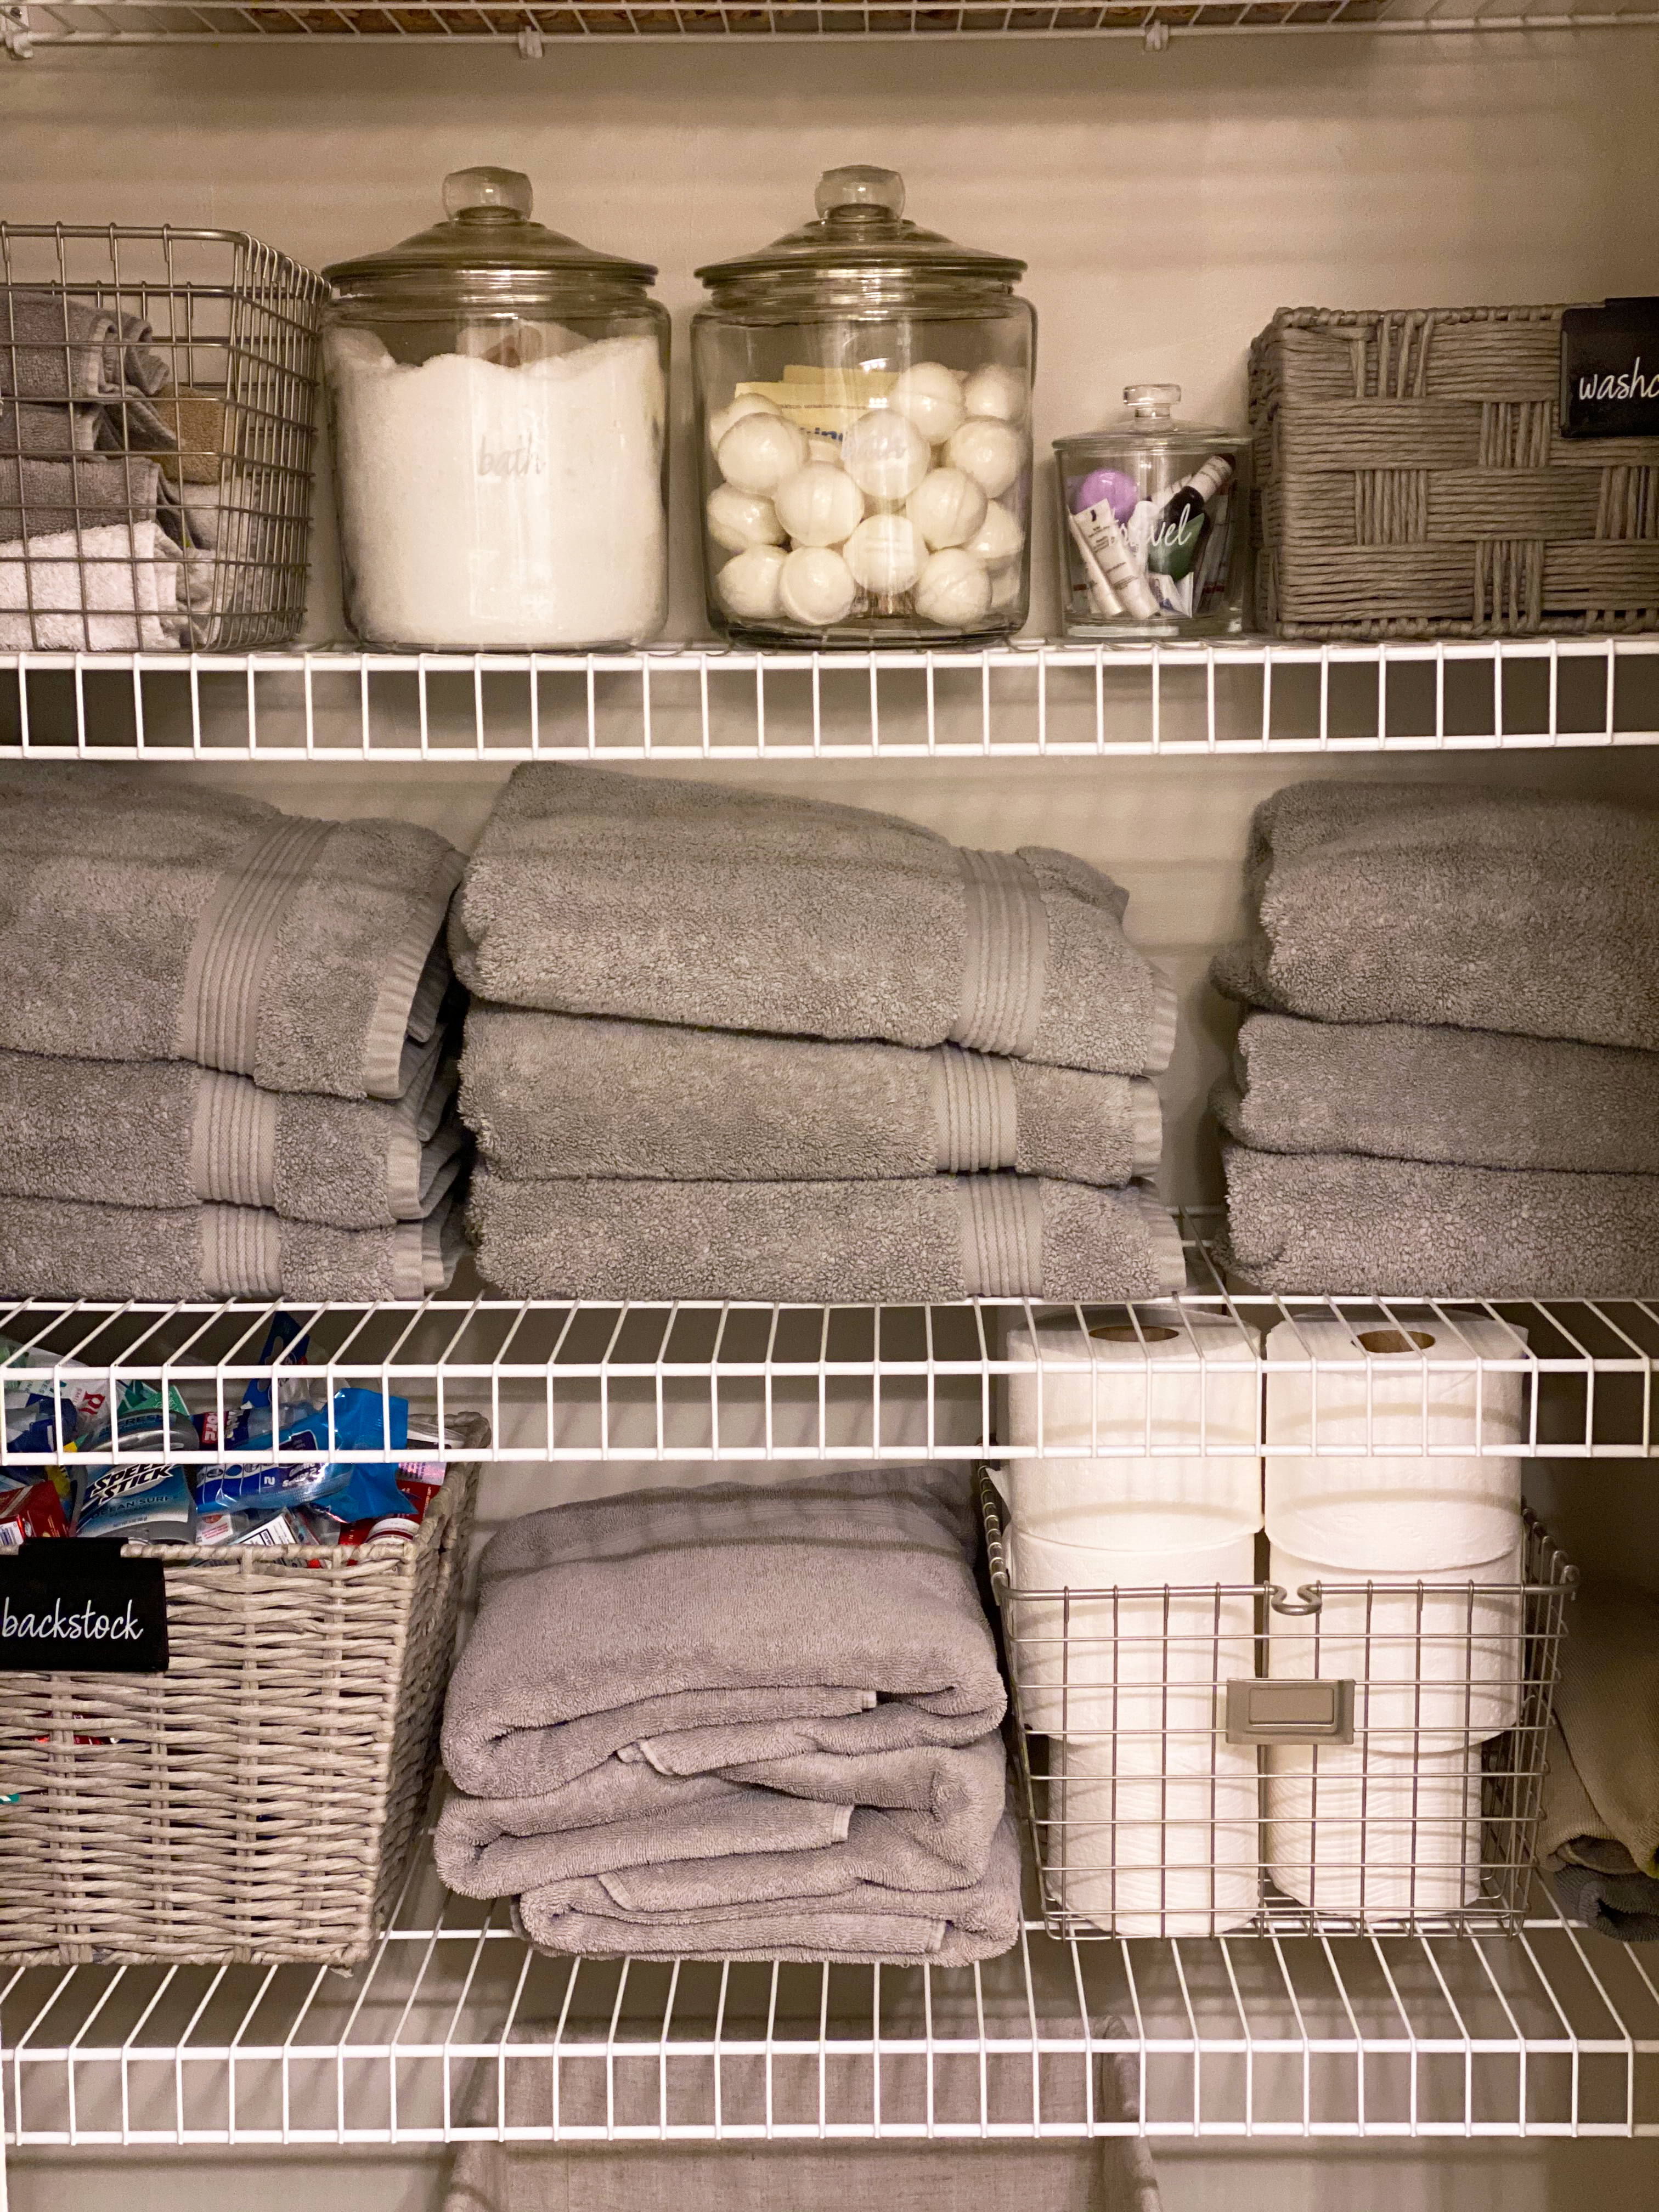 We're loving Shea's linen closet project! Get ready to be inspired to organize your house!